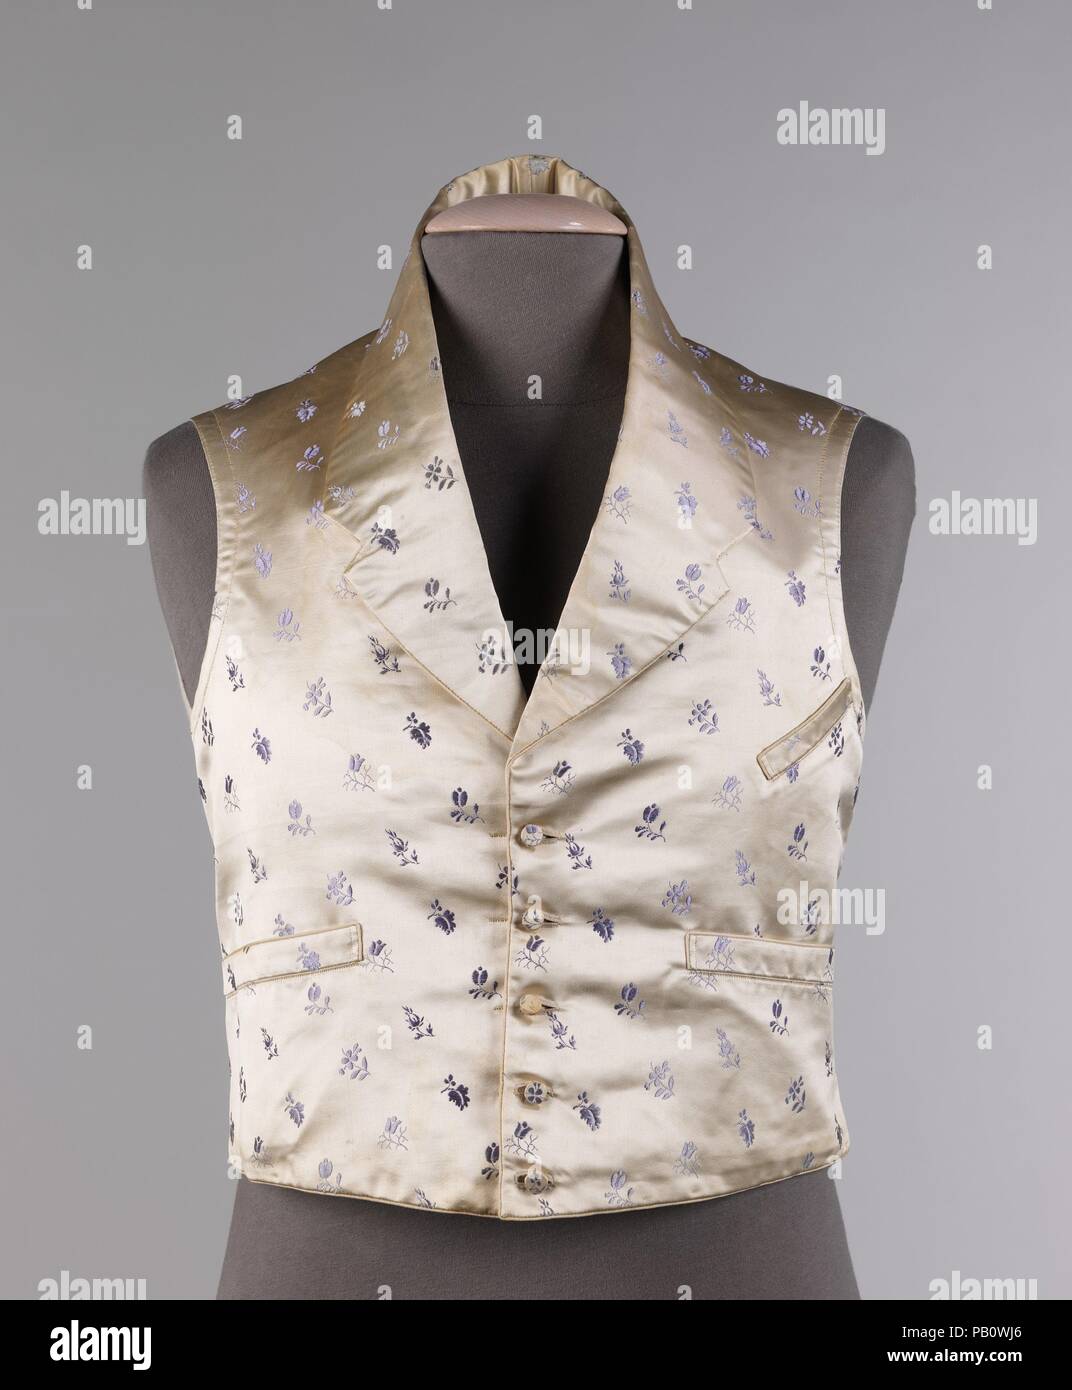 Evening vest. Culture: American. Date: 1830-35. Waistcoats and vests of the  18th and 19th centuries served as a layer protection and ornamentation  during a period in fashion when the coat was intended